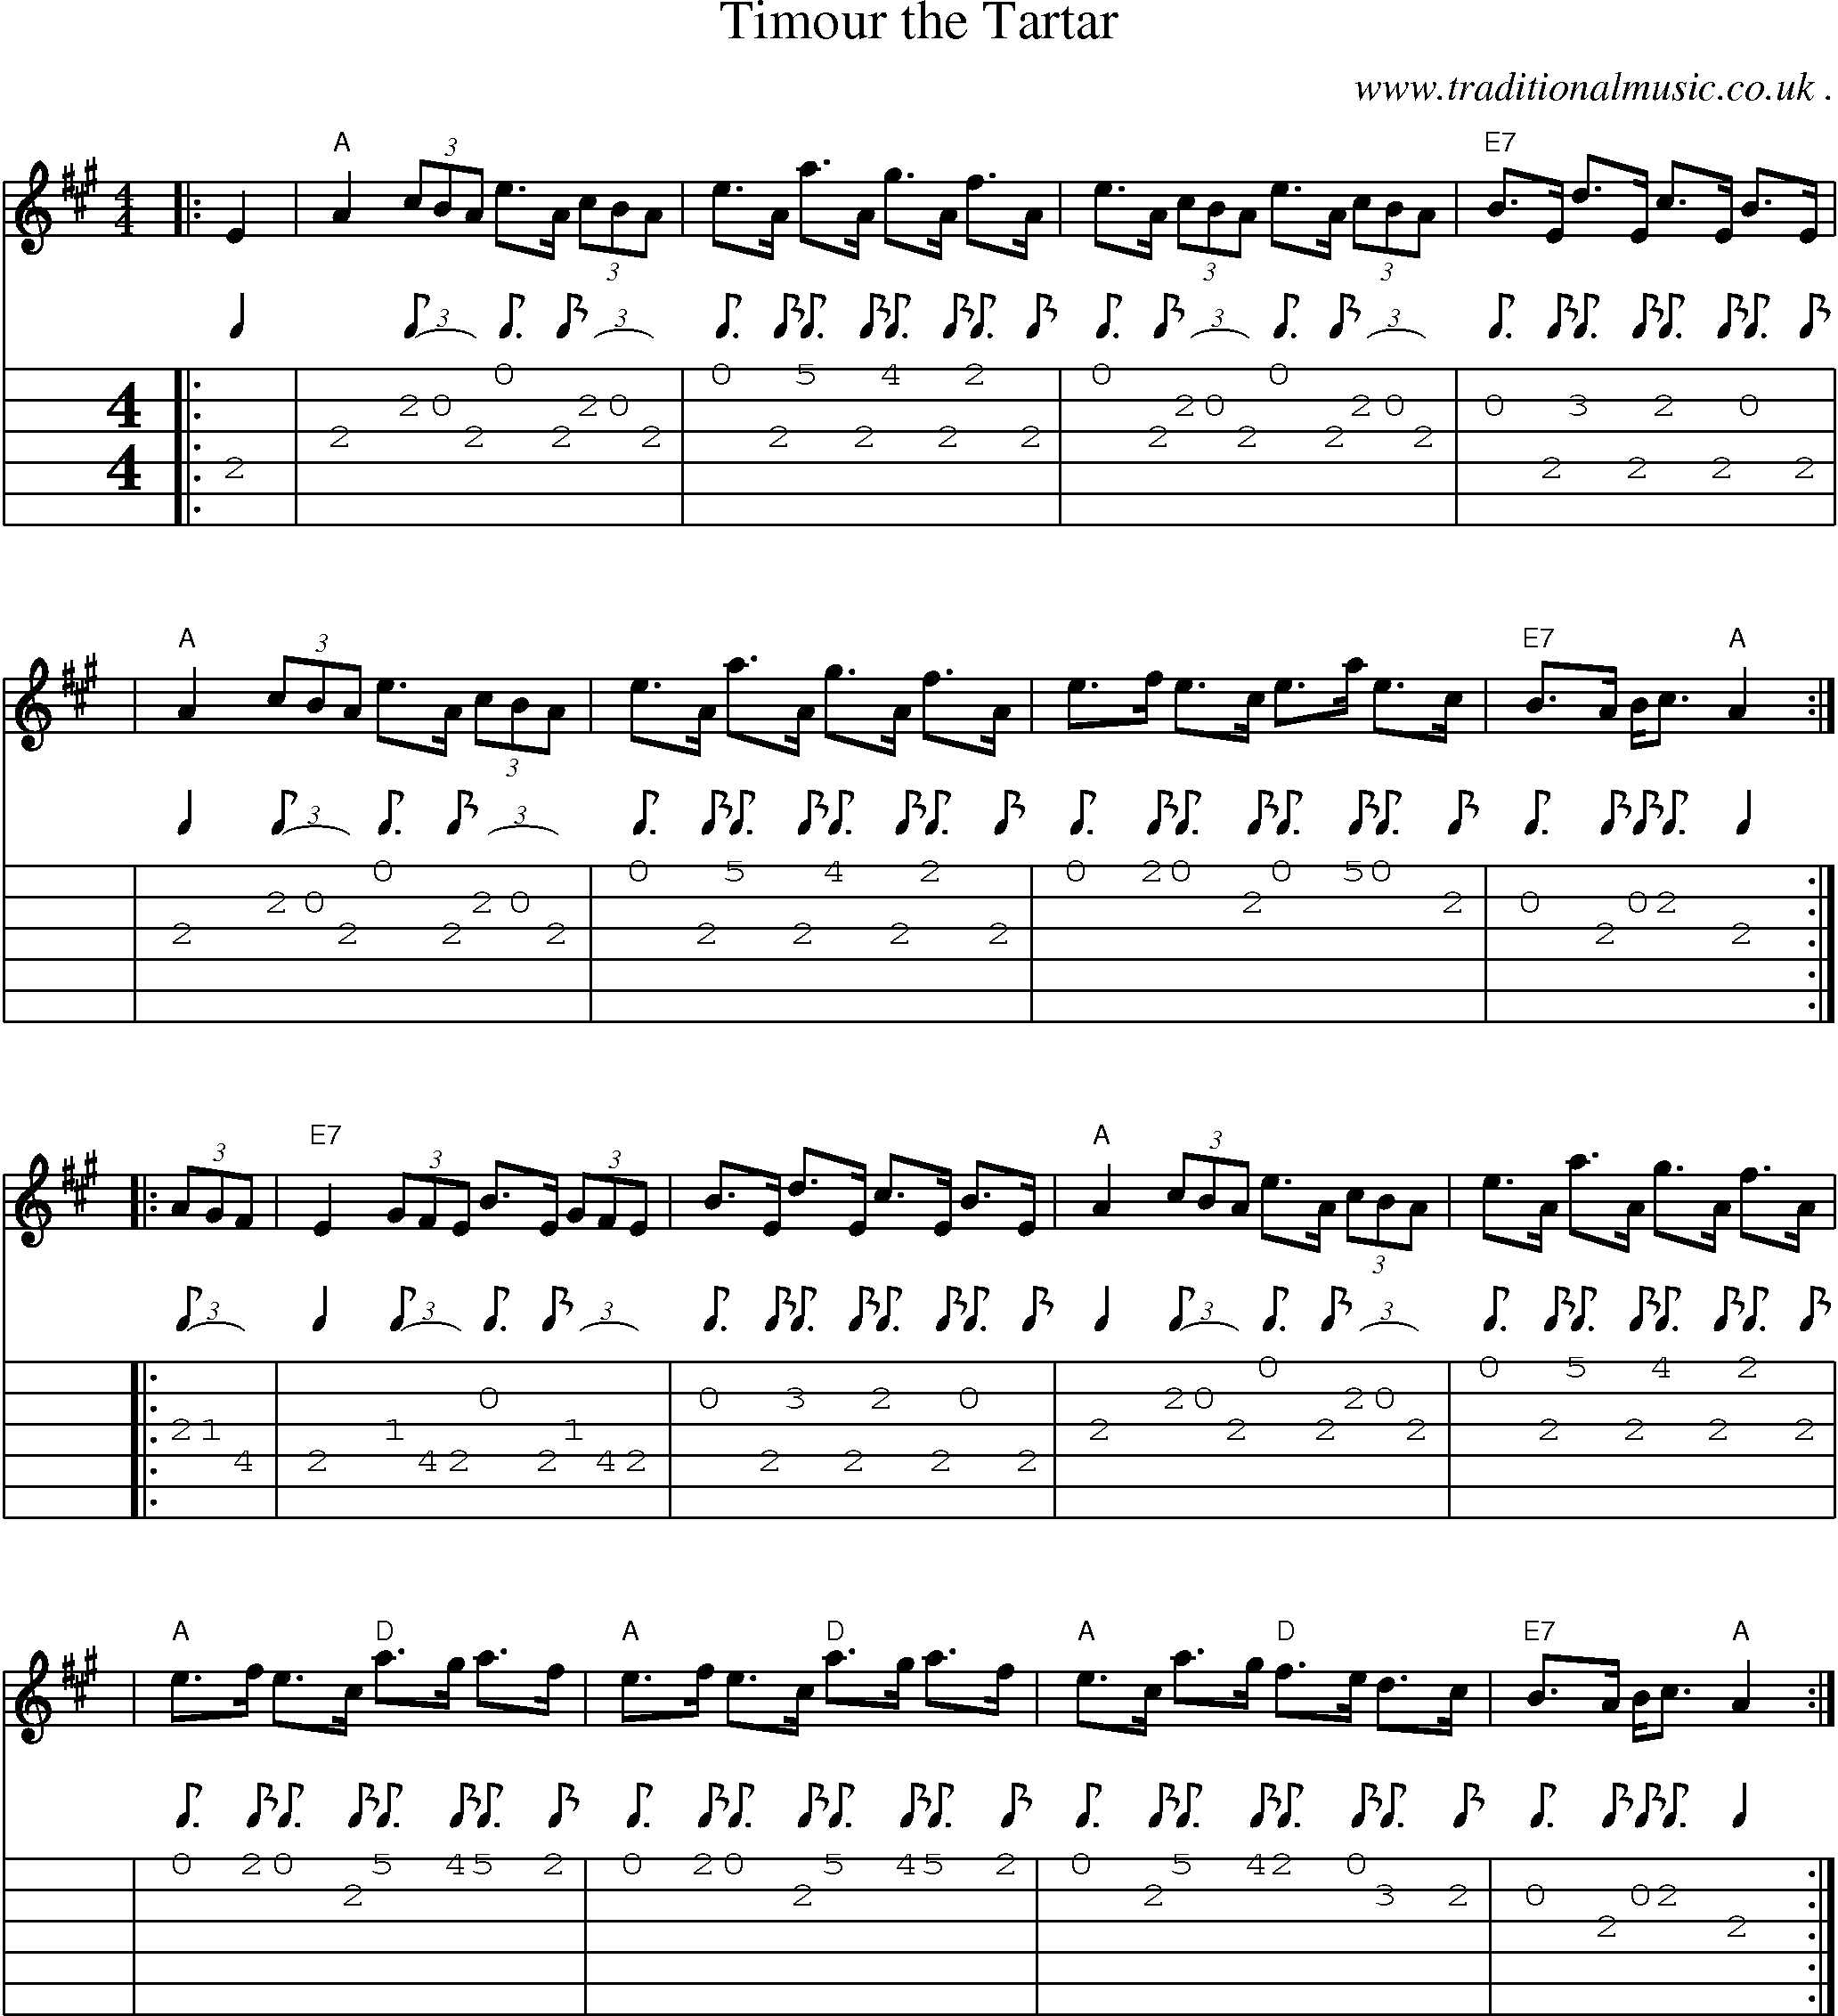 Sheet-music  score, Chords and Guitar Tabs for Timour The Tartar